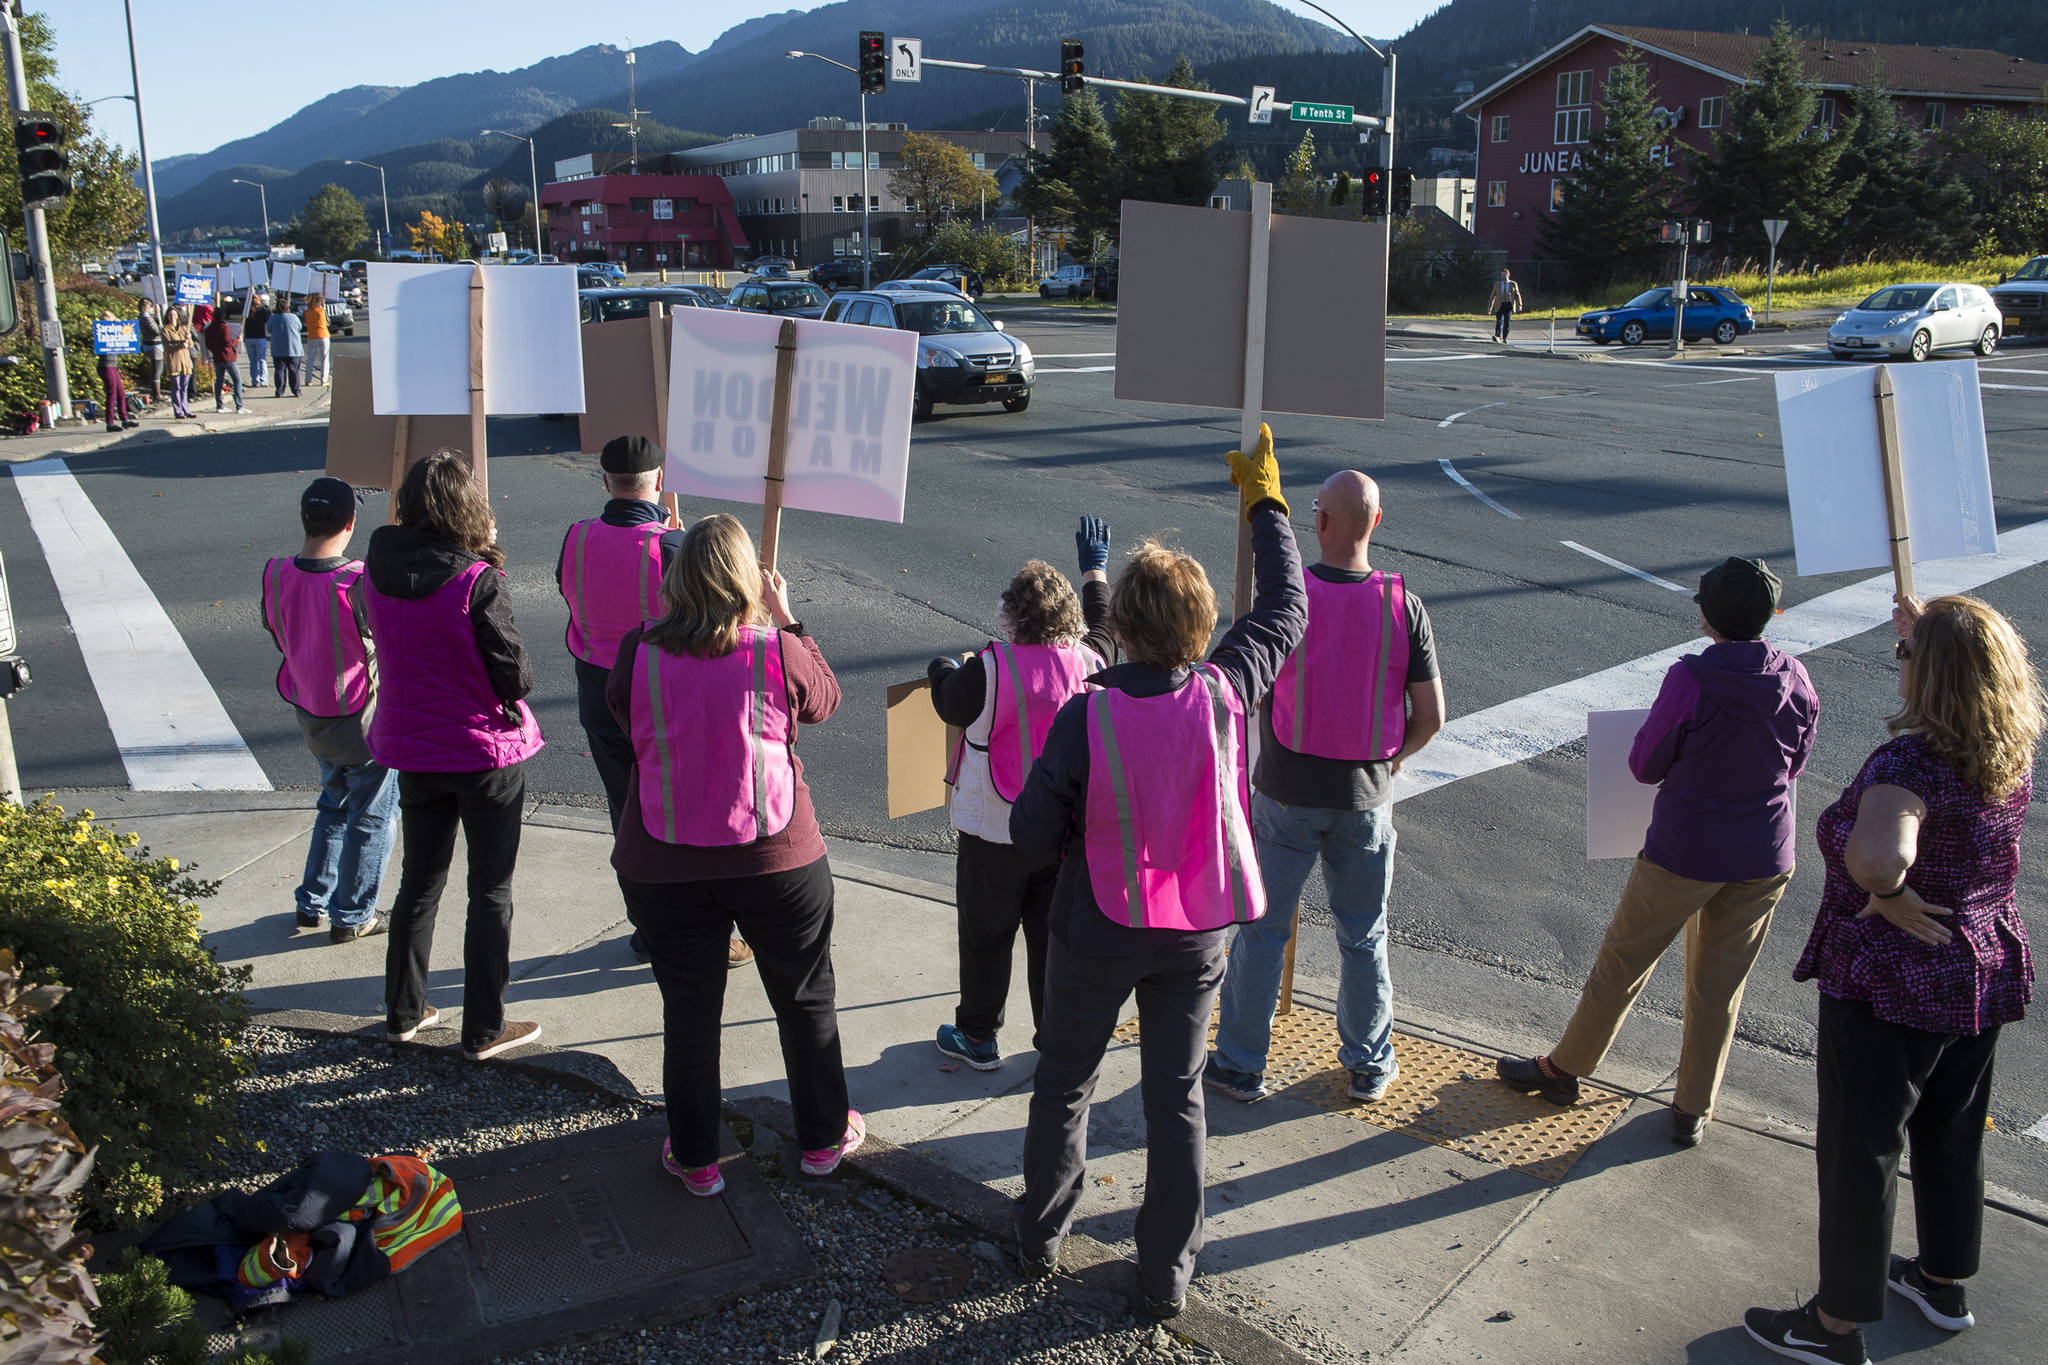 Supporters for mayoral candidates Beth Weldon, Saralyn Tabachnick and Assembly candidate Michelle Bonnet Hale wave signs at the corner of 10th Street and Egan Drive on Monday, Oct. 1, 2018, to remind drivers to vote in the Municipal Election Tuesday. (Michael Penn | Juneau Empire)